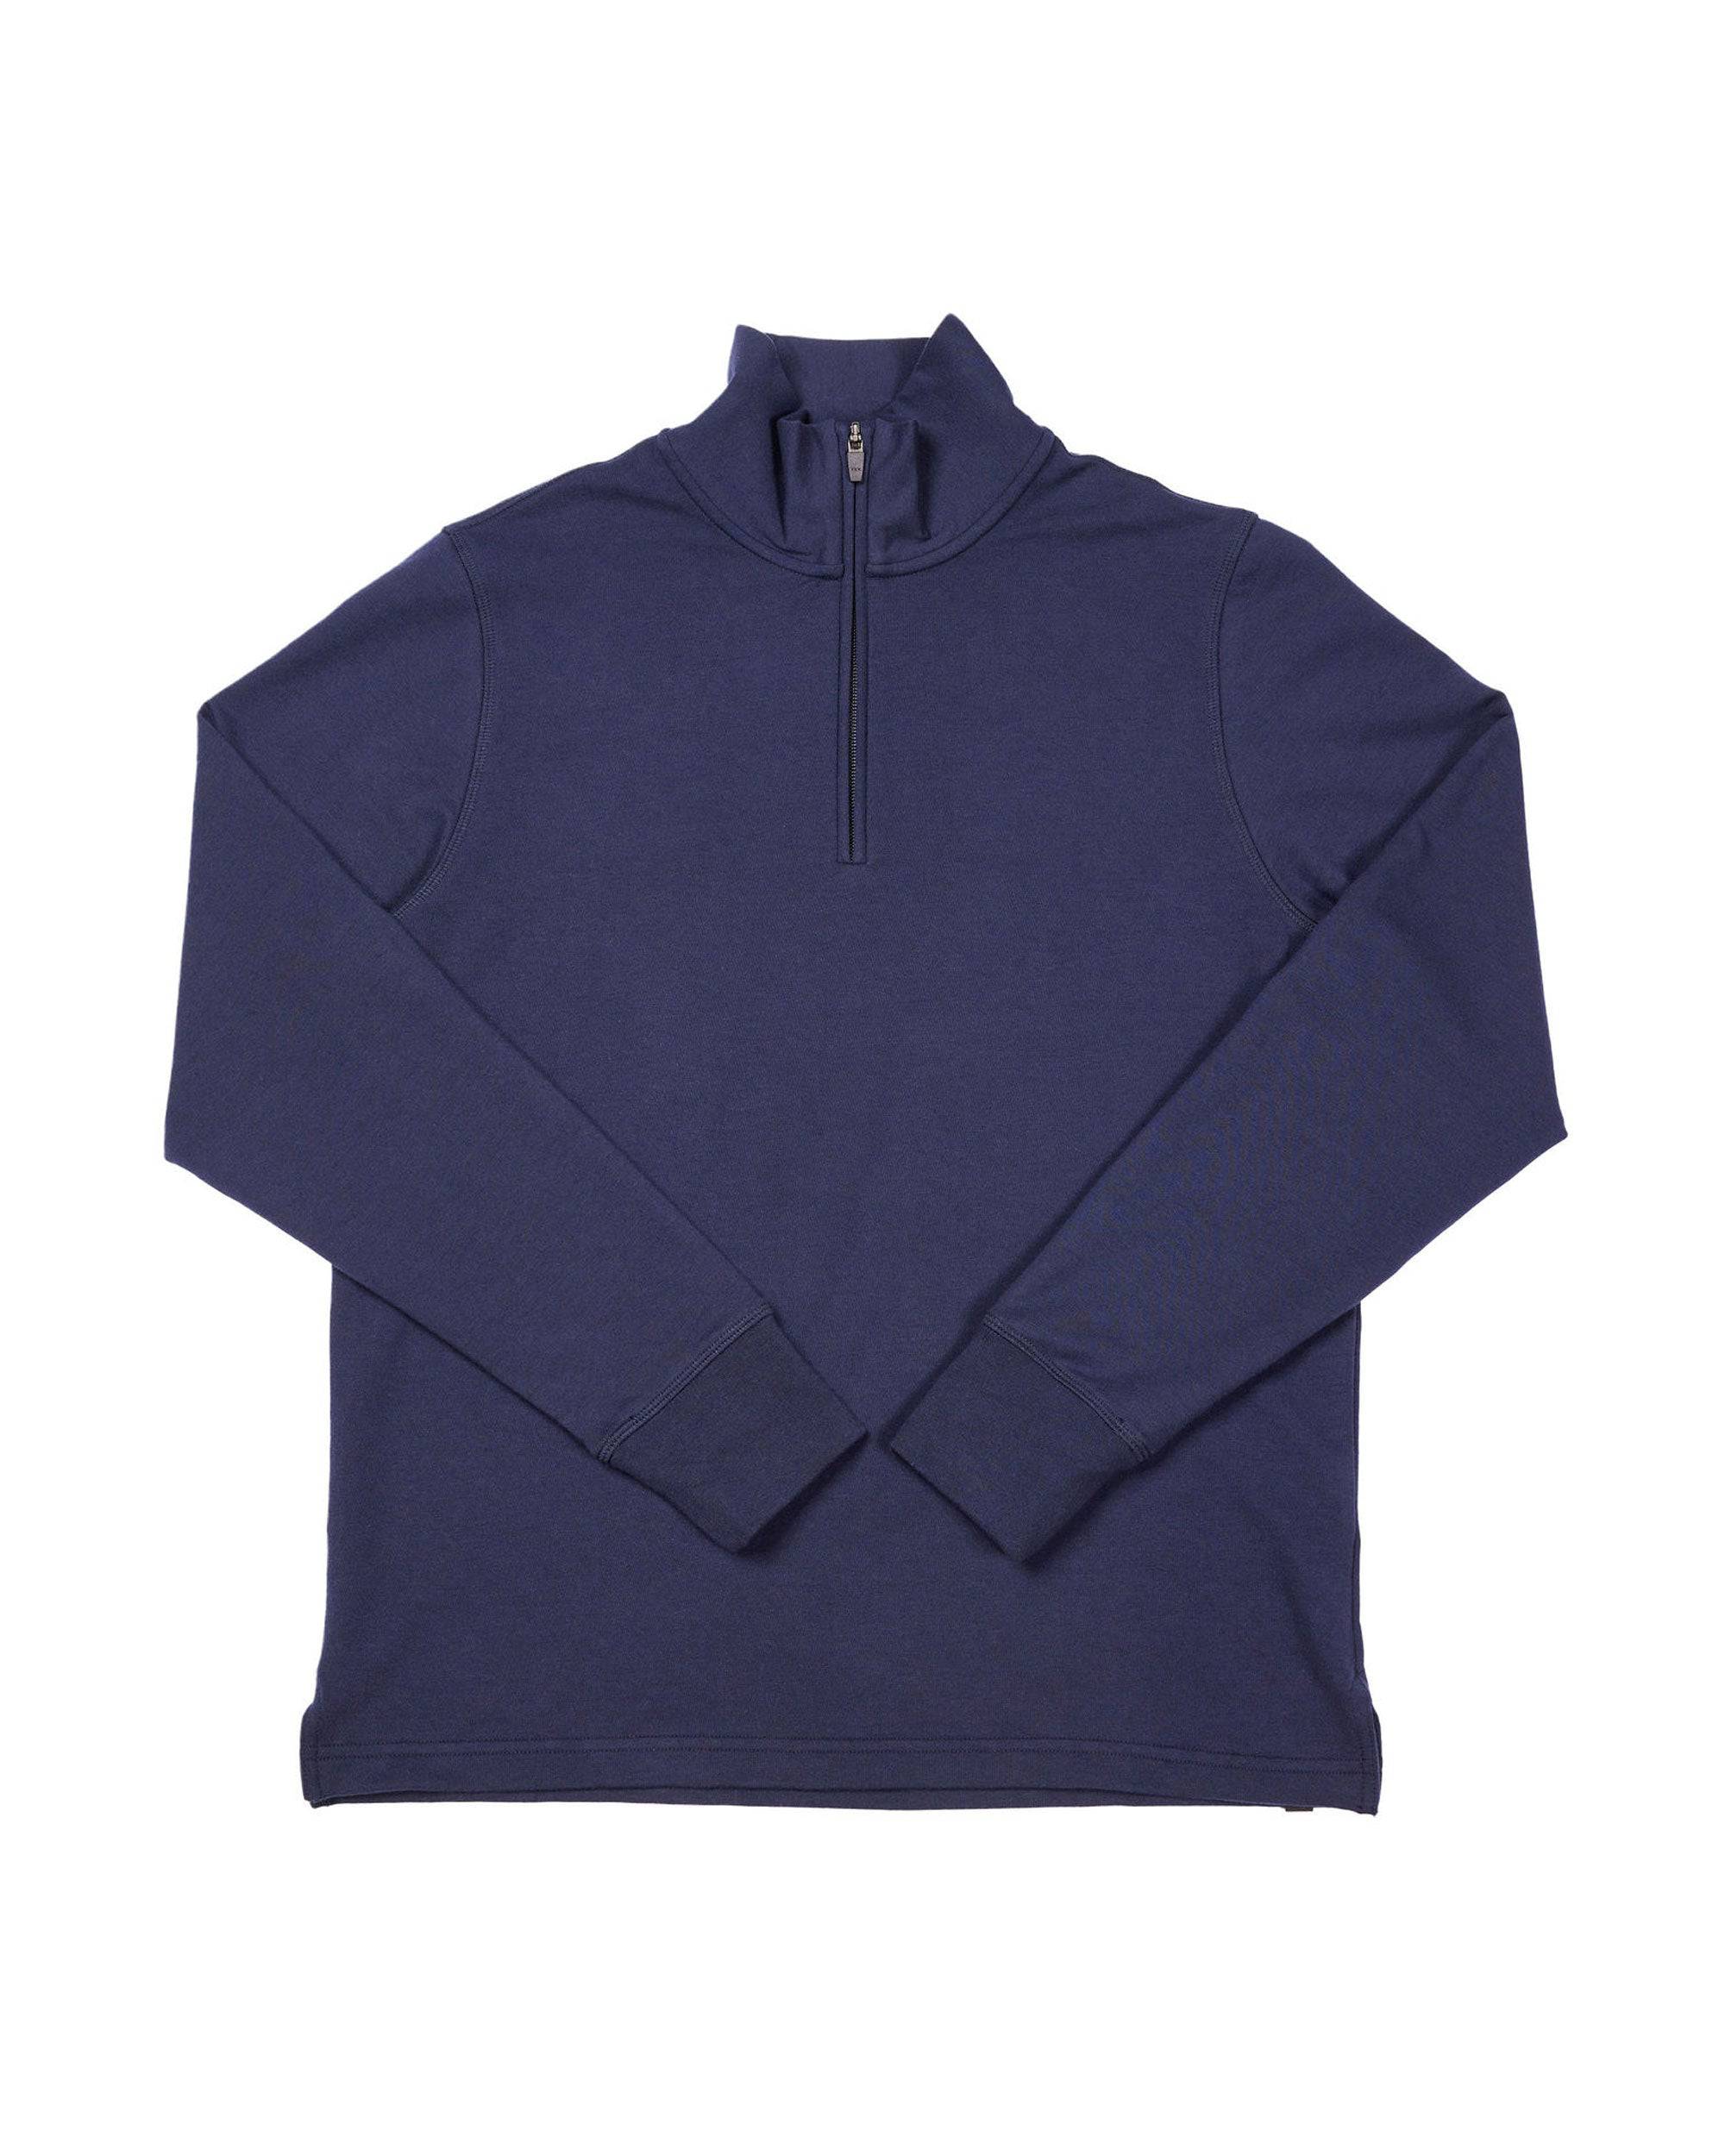 Solace Quarter Zip Navy - Foreign Rider Co.